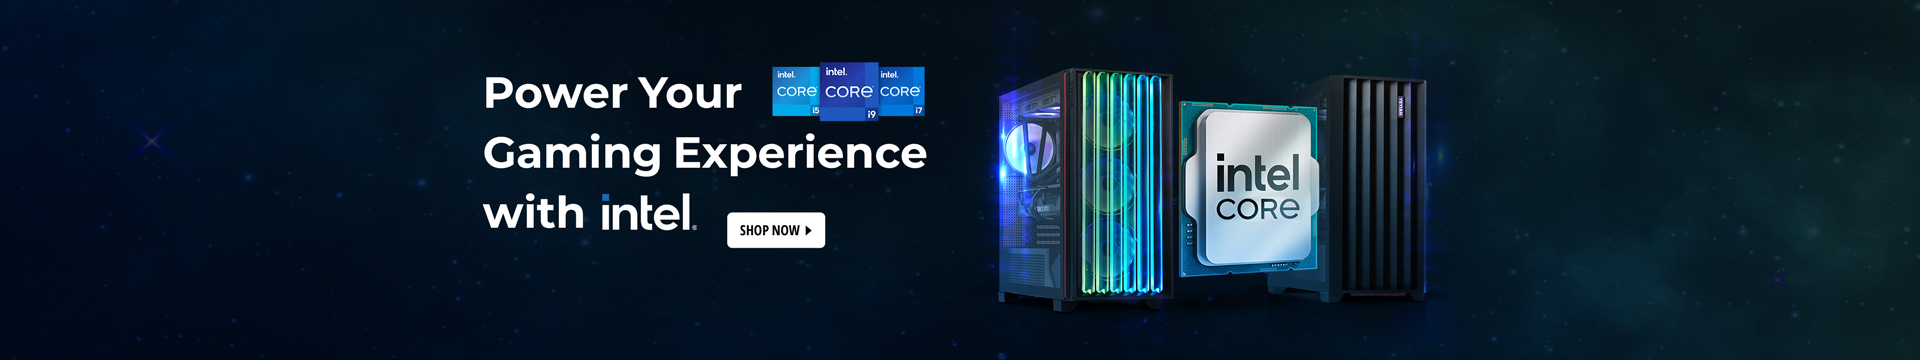 Power your Gaming Experience with intel